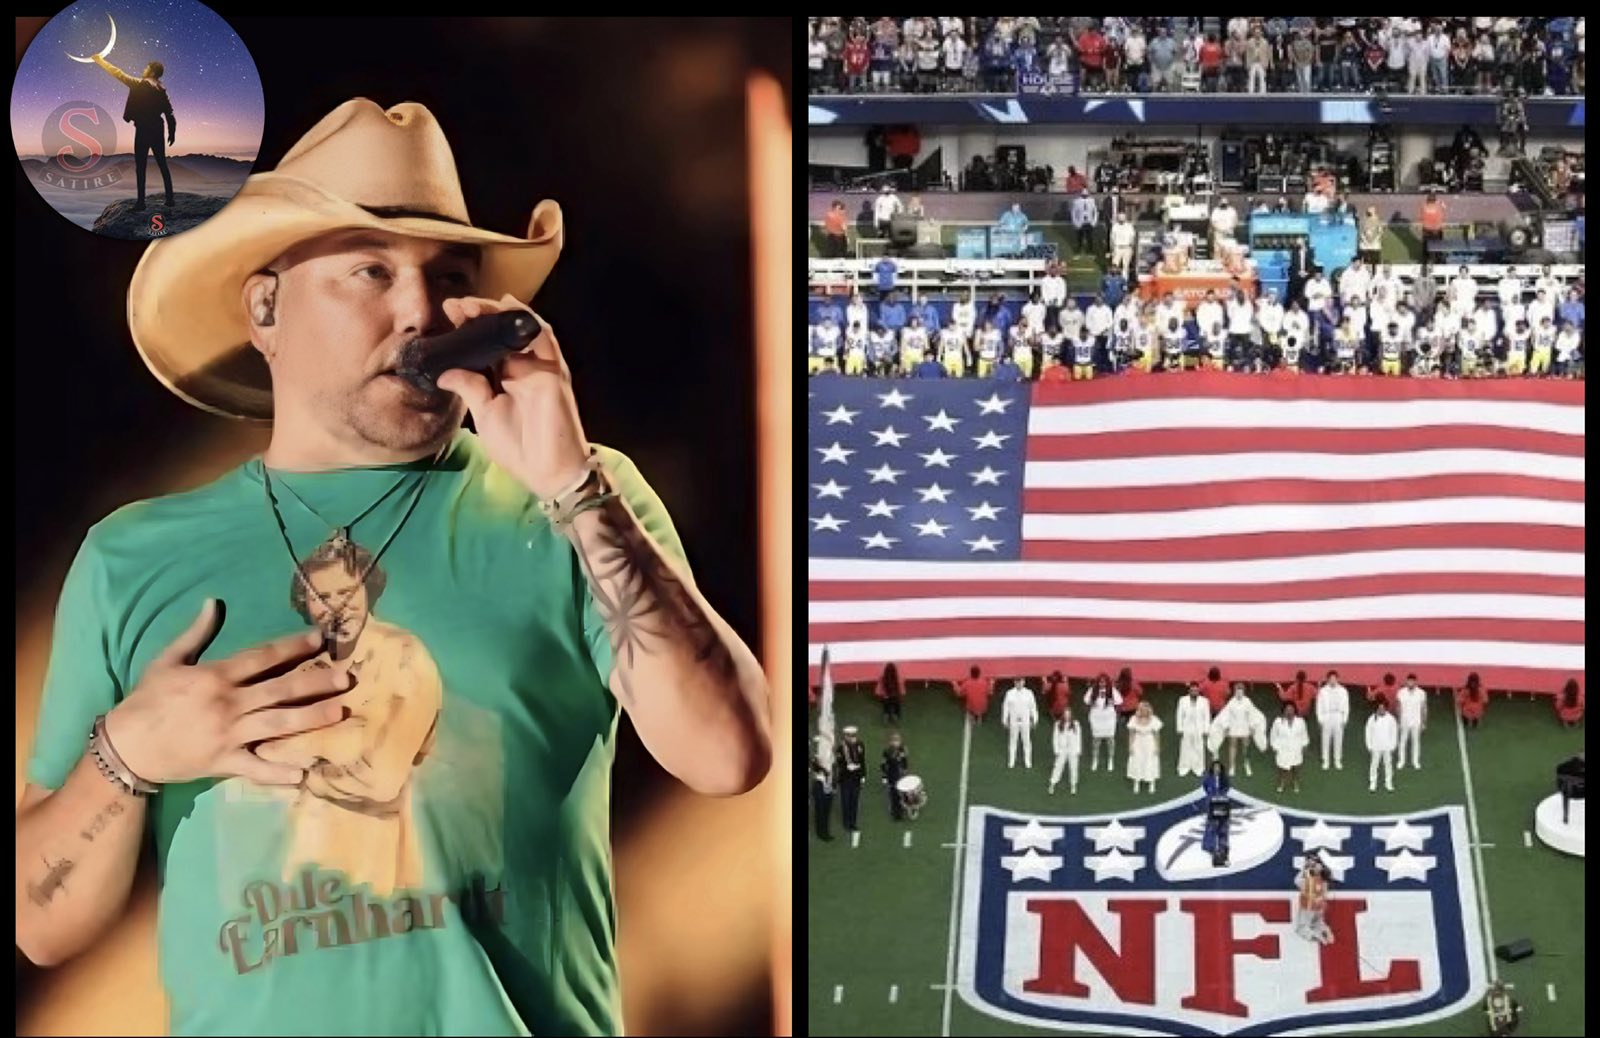 Jason Aldean refuses a $1 million paycheck to perform the national anthem at the Super Bowl.